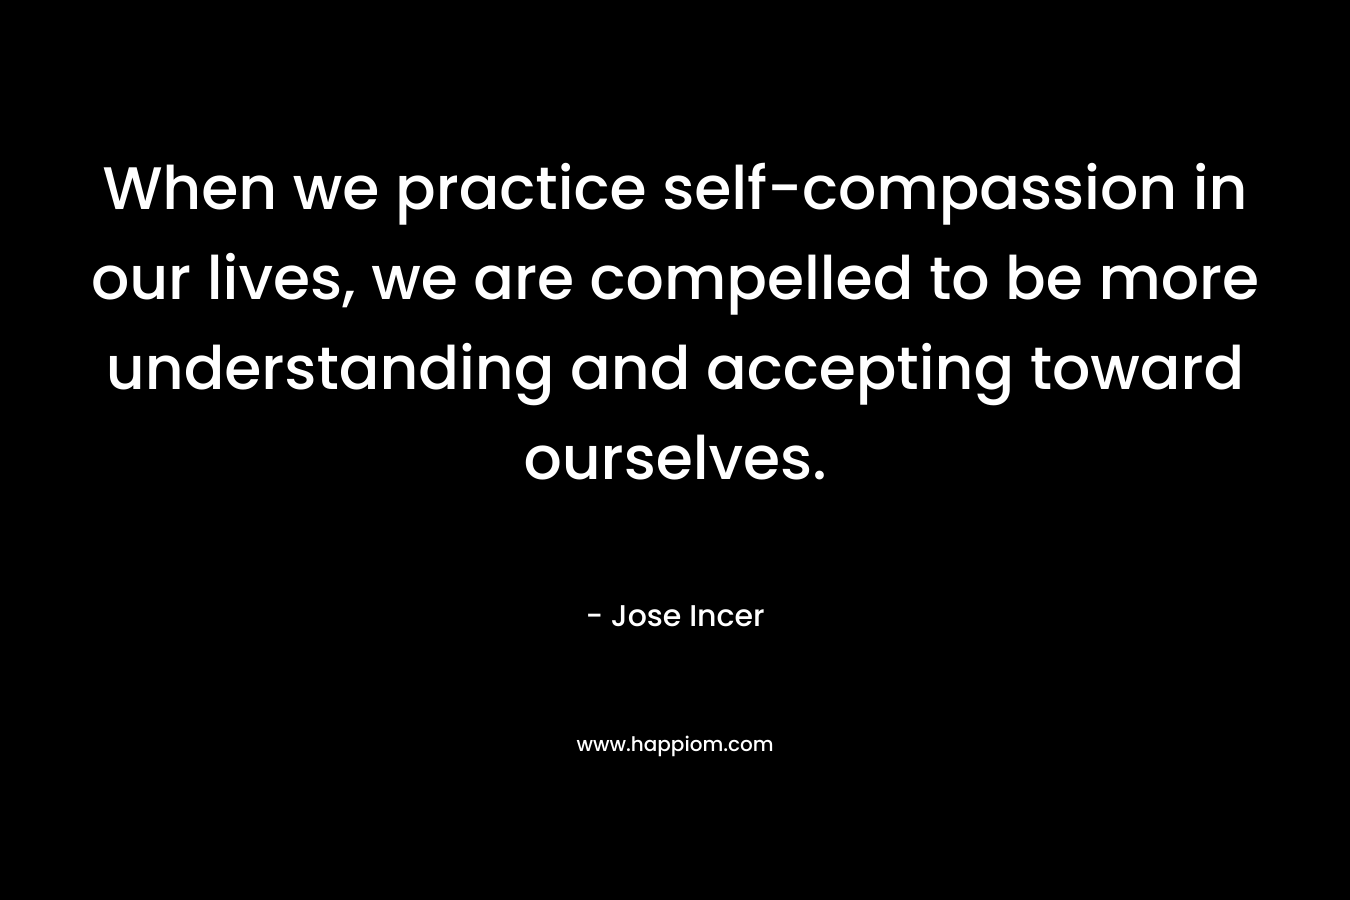 When we practice self-compassion in our lives, we are compelled to be more understanding and accepting toward ourselves.